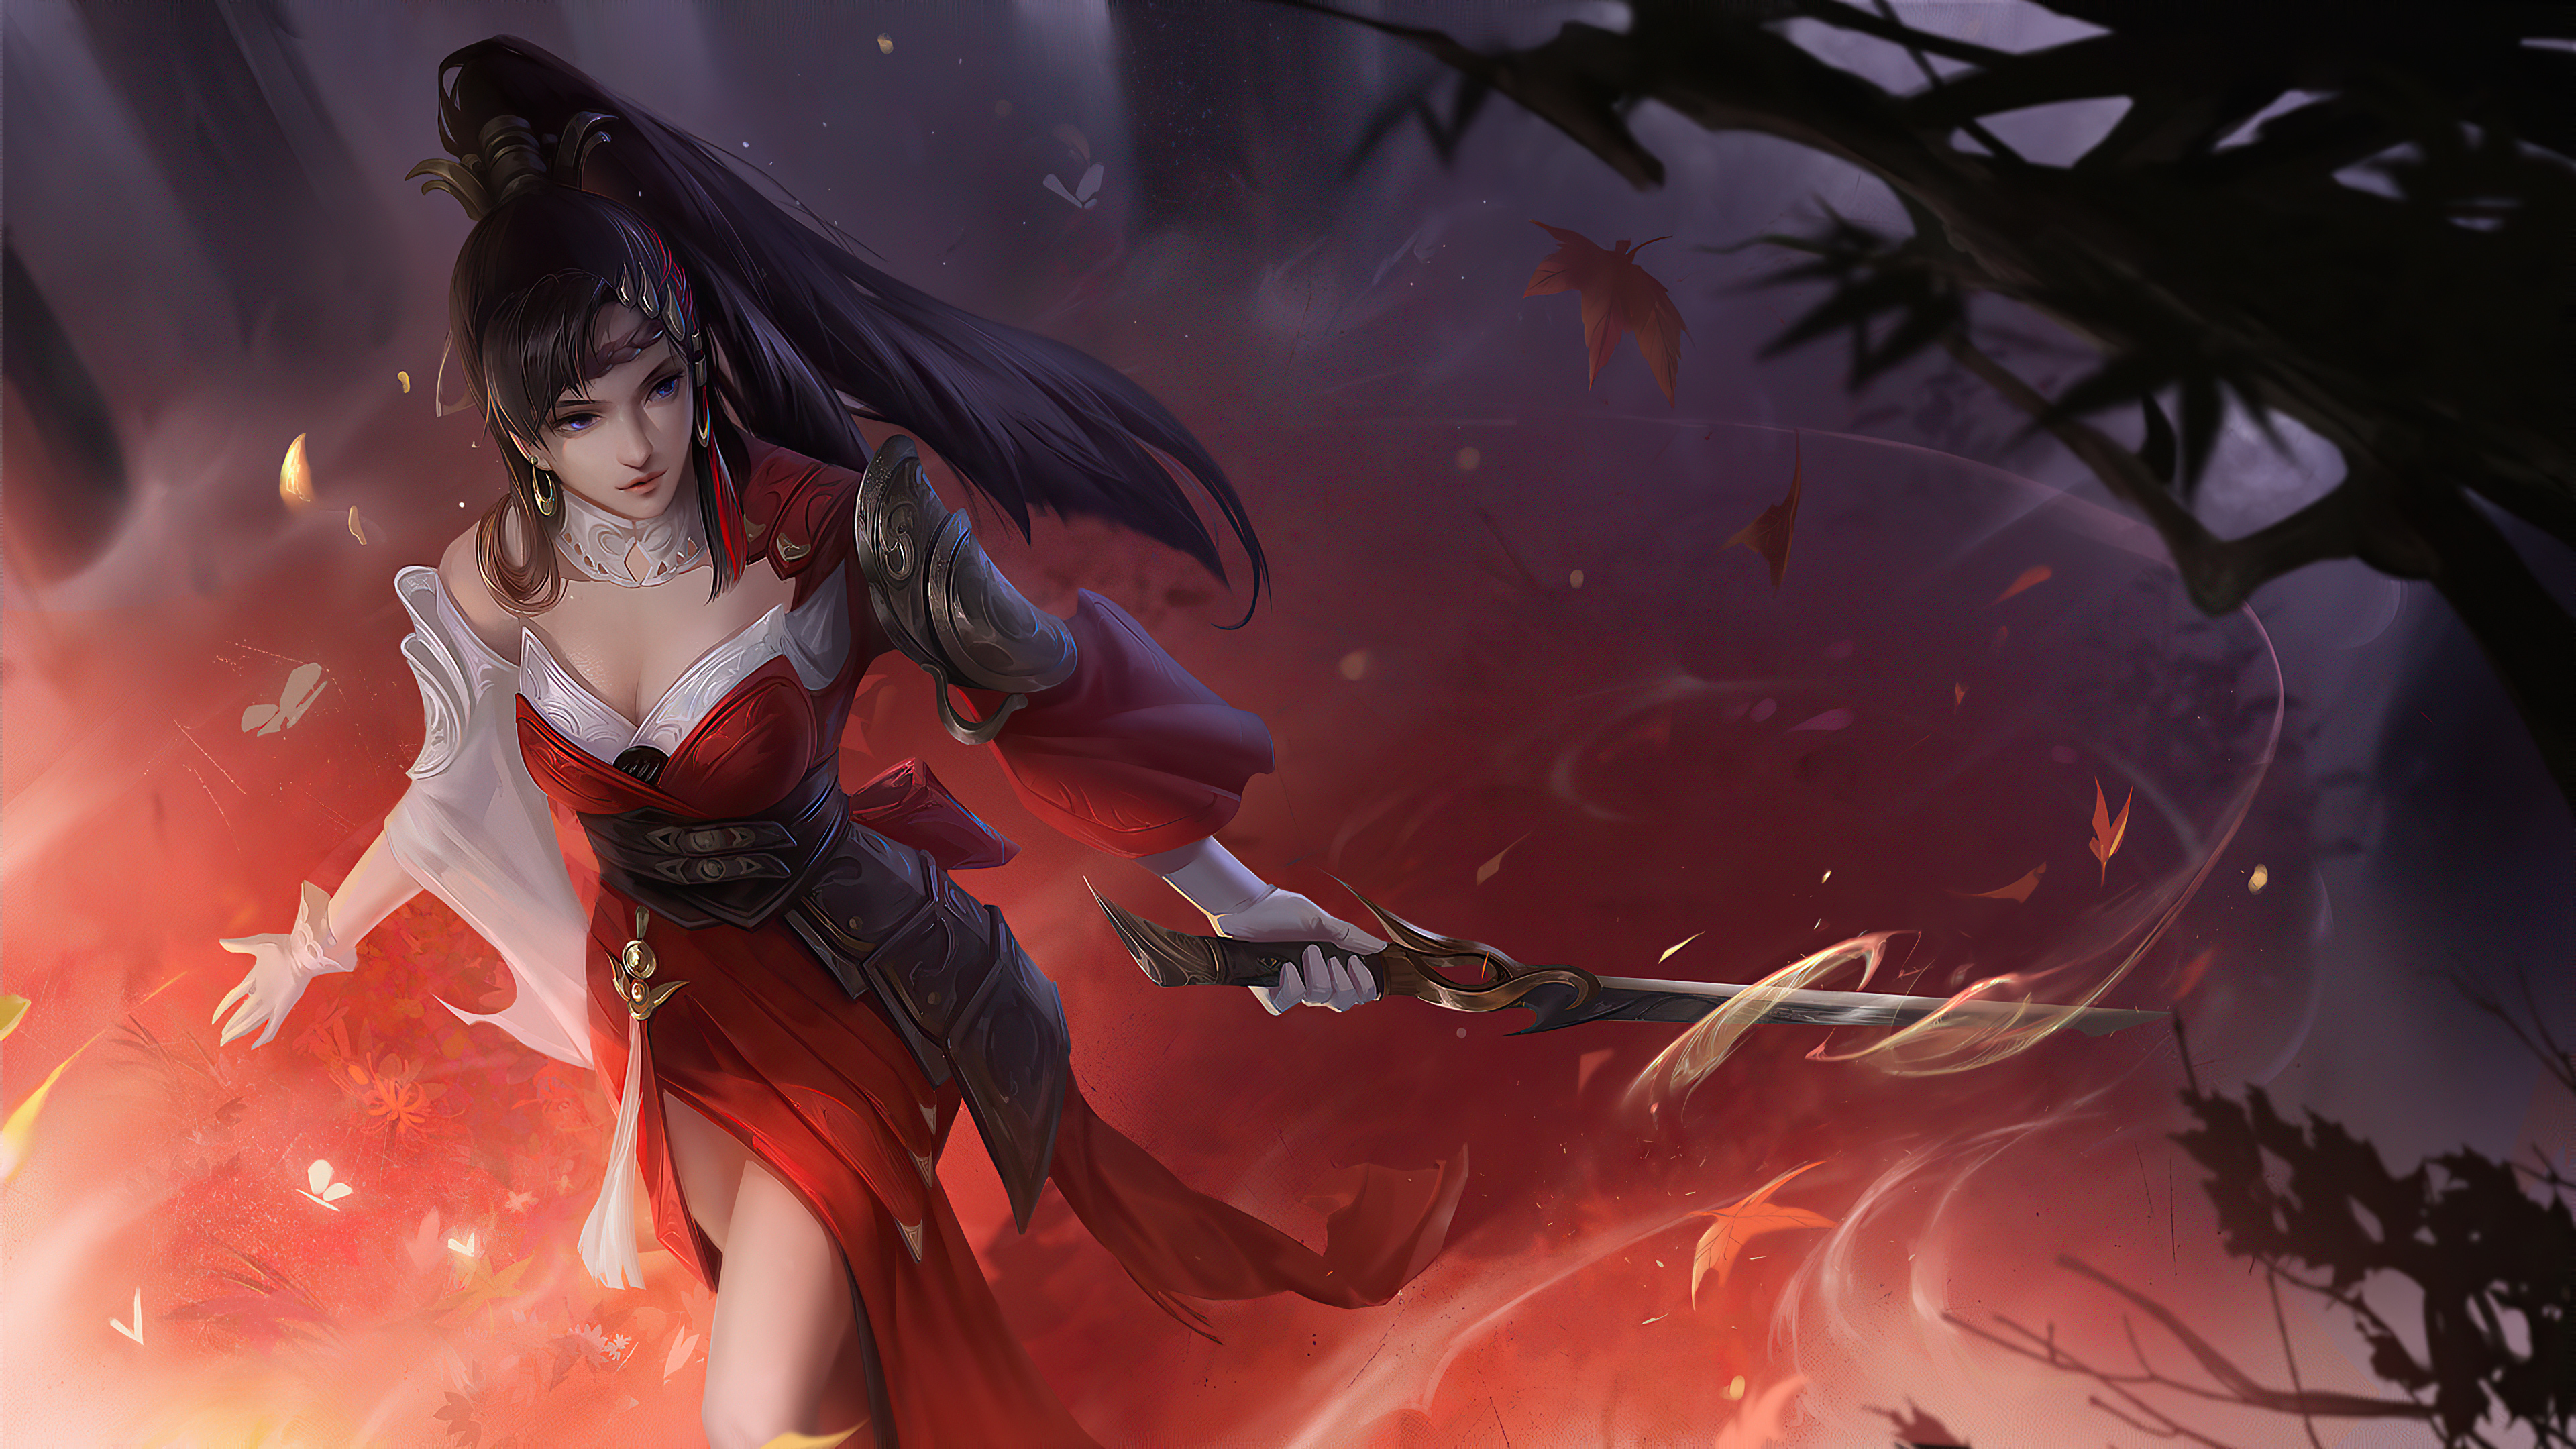 Anime girl warrior with sword k hd artist k wallpapers images backgrounds photos and pictures